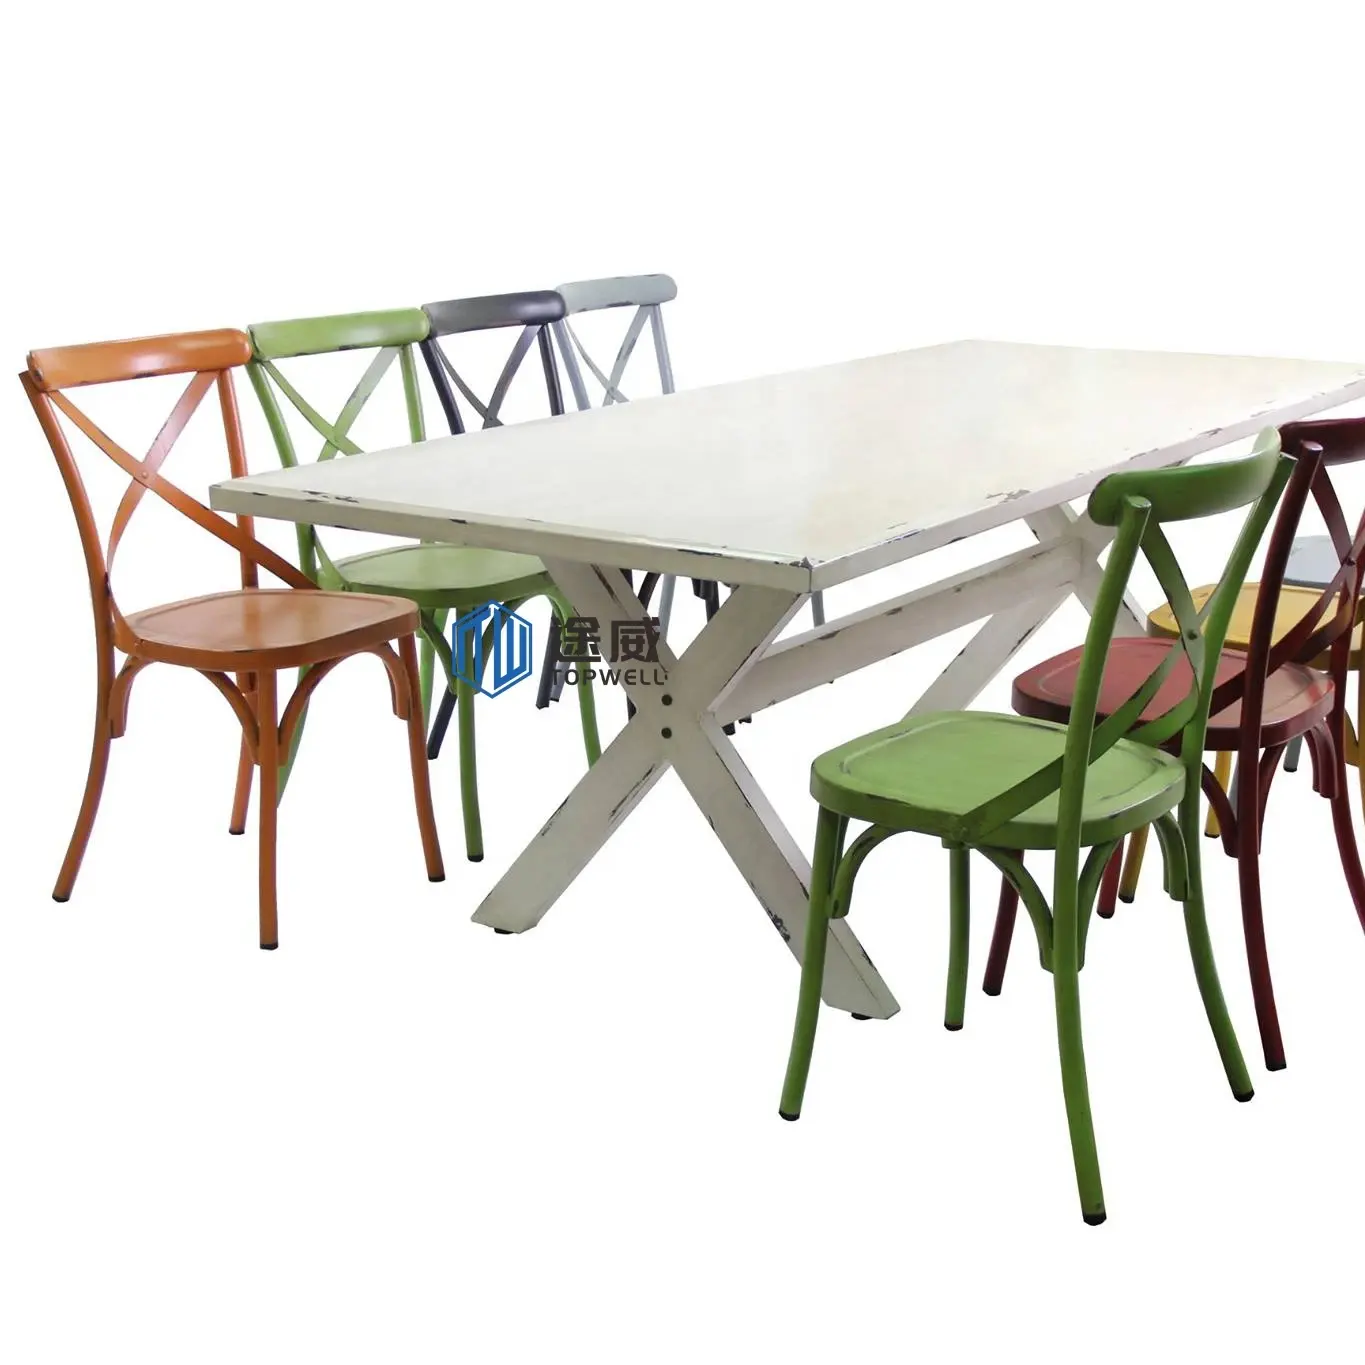 Aluminum Cross Back Dining Chair And Table Outdoor Coffee Restaurant Table chair Antique Bistro tables And chairs